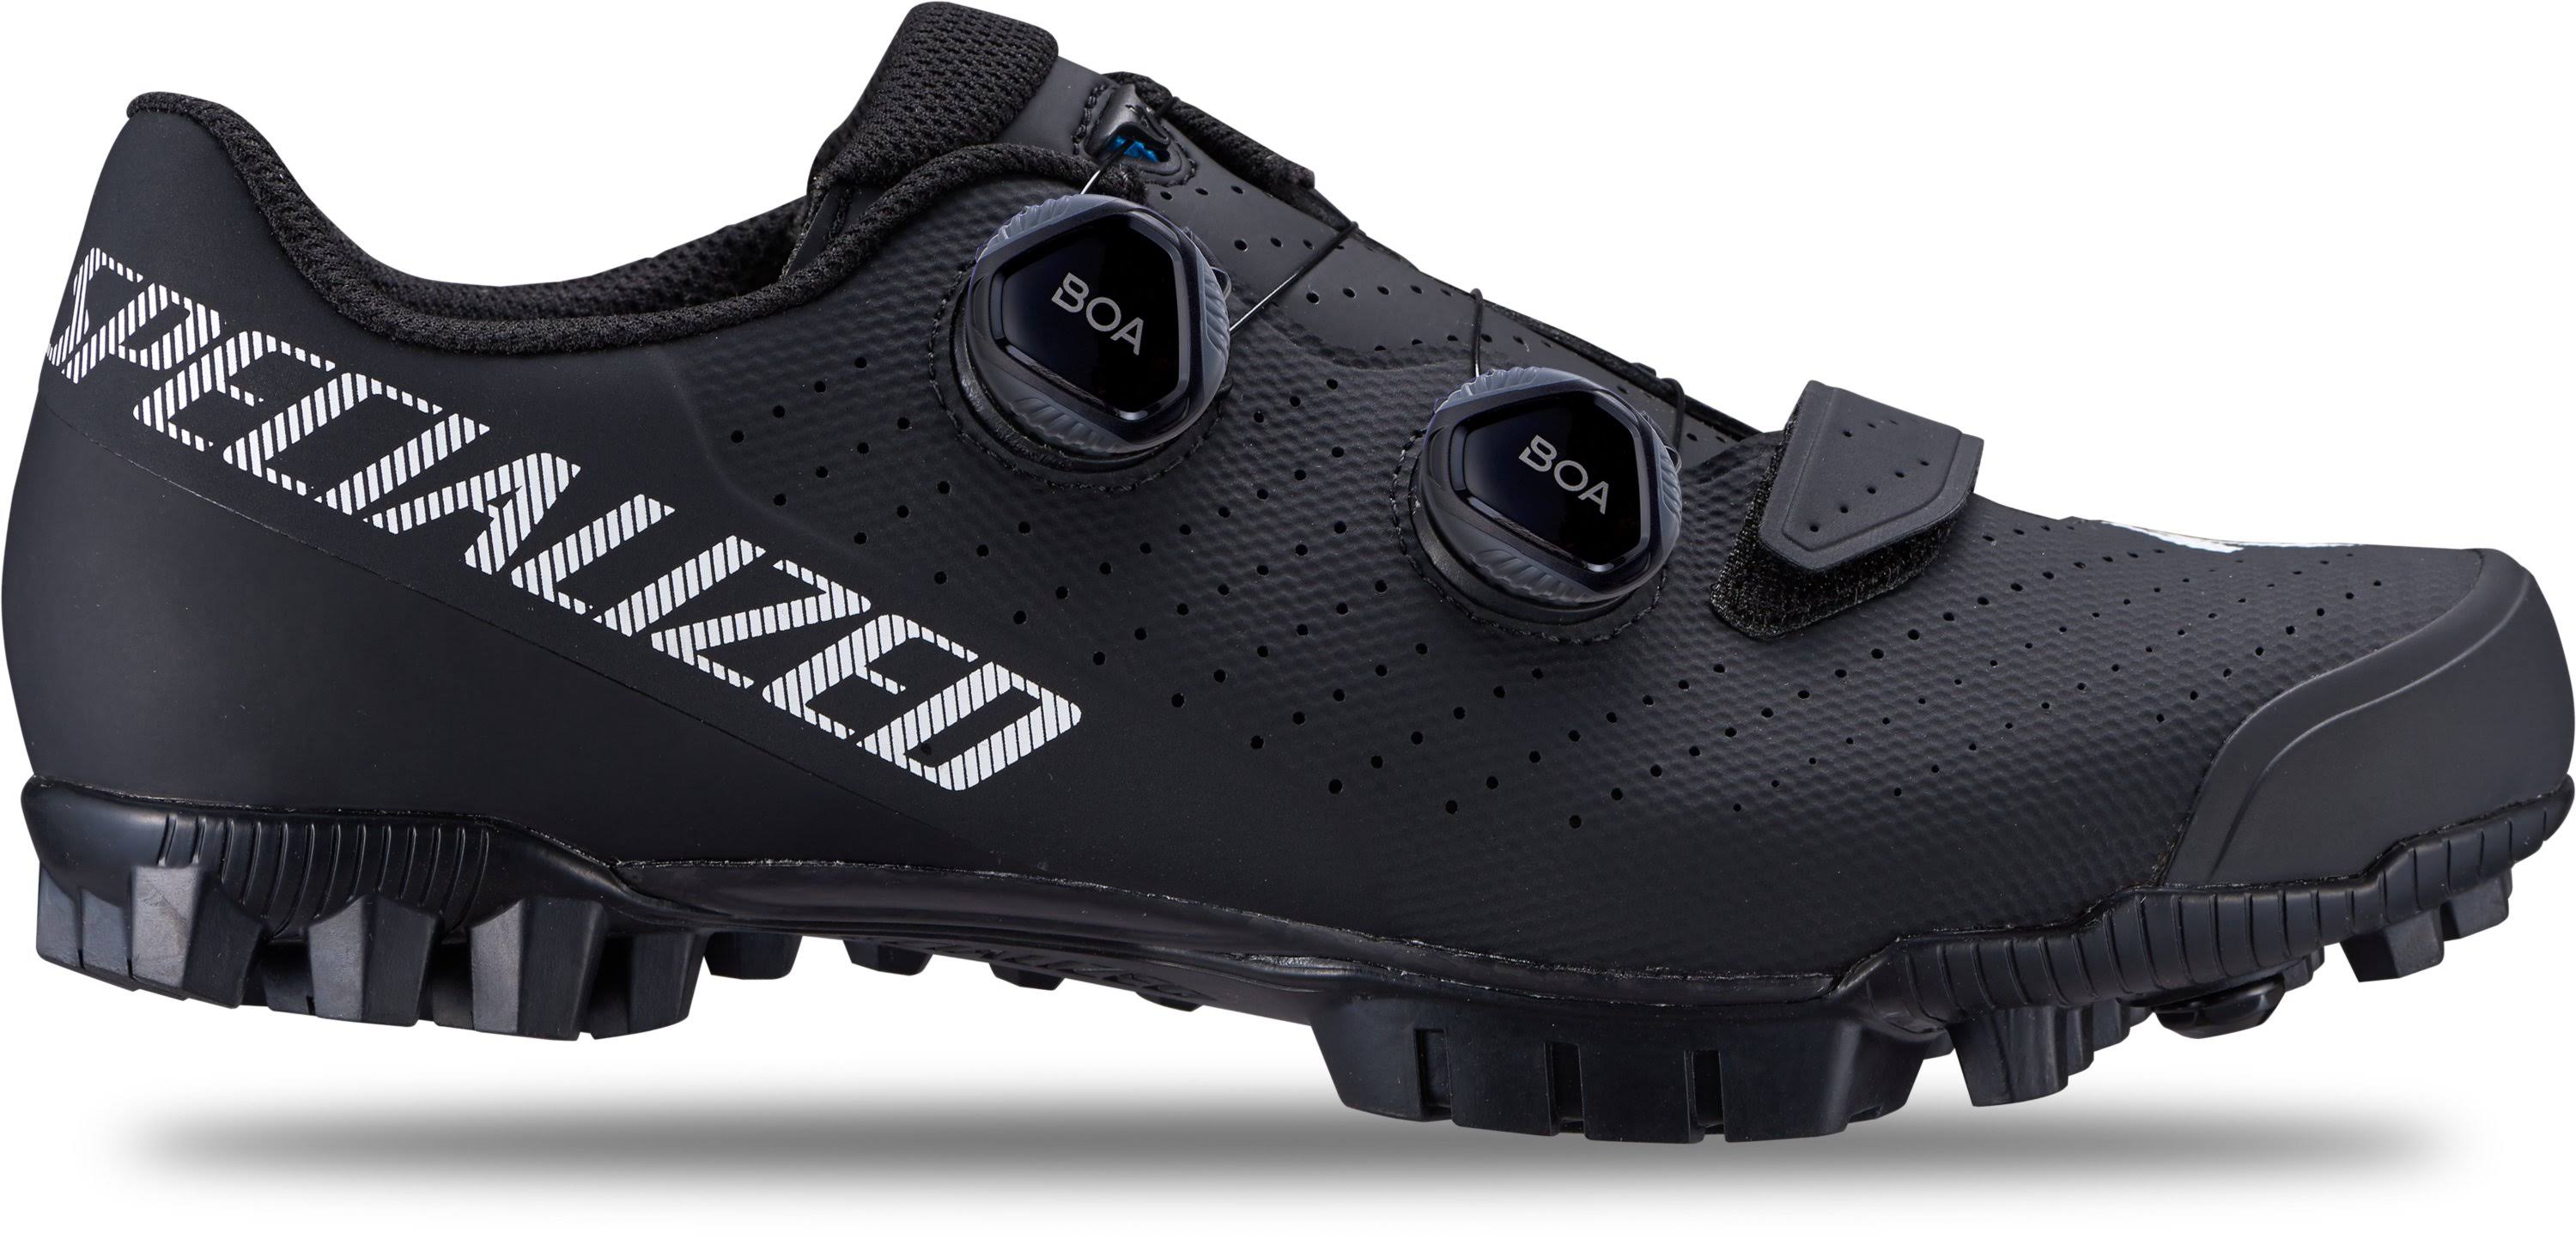 Specialized Recon 3.0 MTB Shoes Black